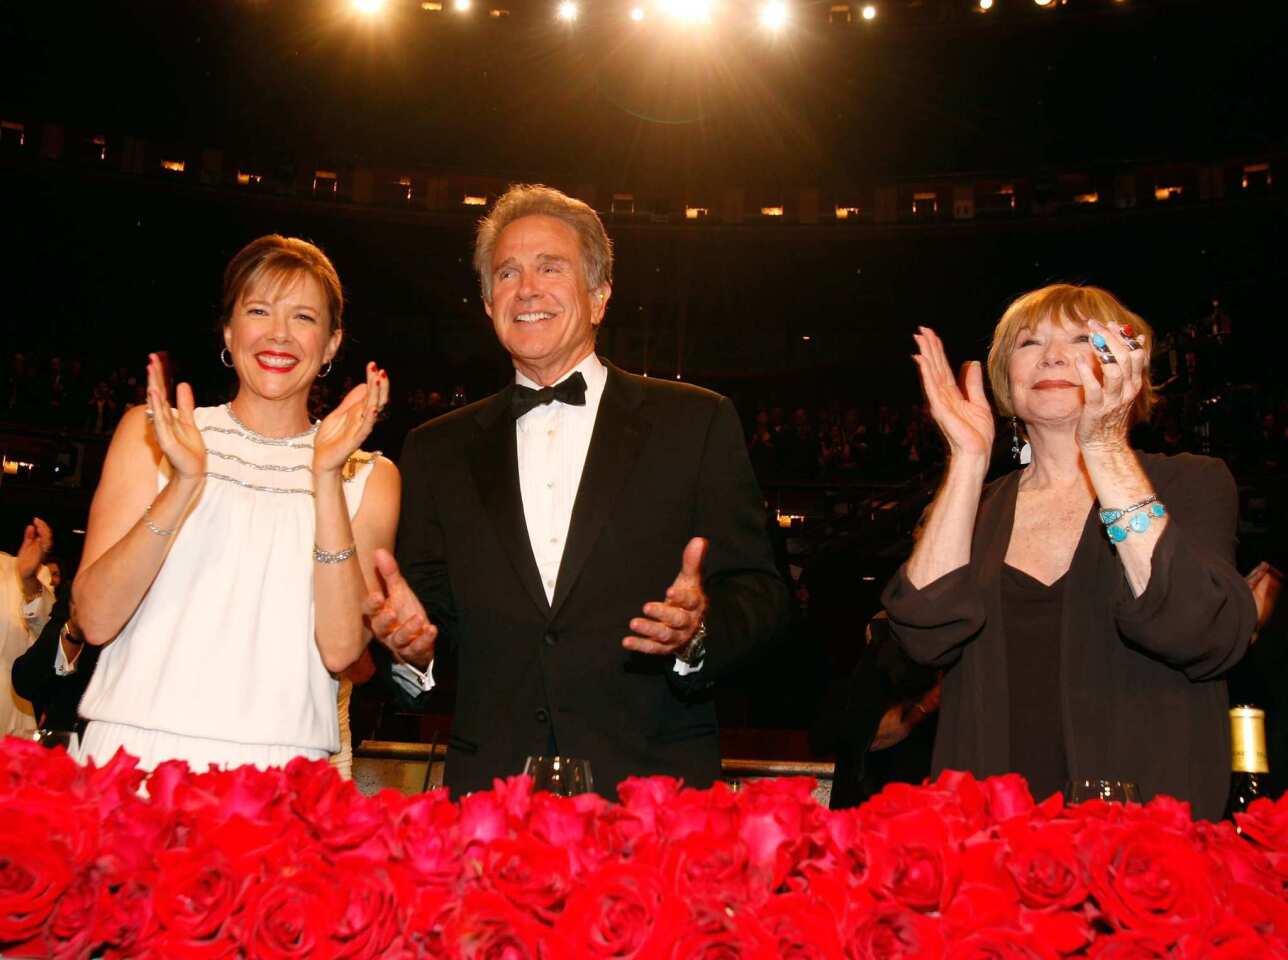 In 2012, Shirley MacLaine was awarded the American Film Institute's highest honor: the 40th Life Achievement Award. MacLaine's younger brother, Warren Beatty, received the AFI honor in 2008. At left is Beatty's wife, actress Annette Bening.